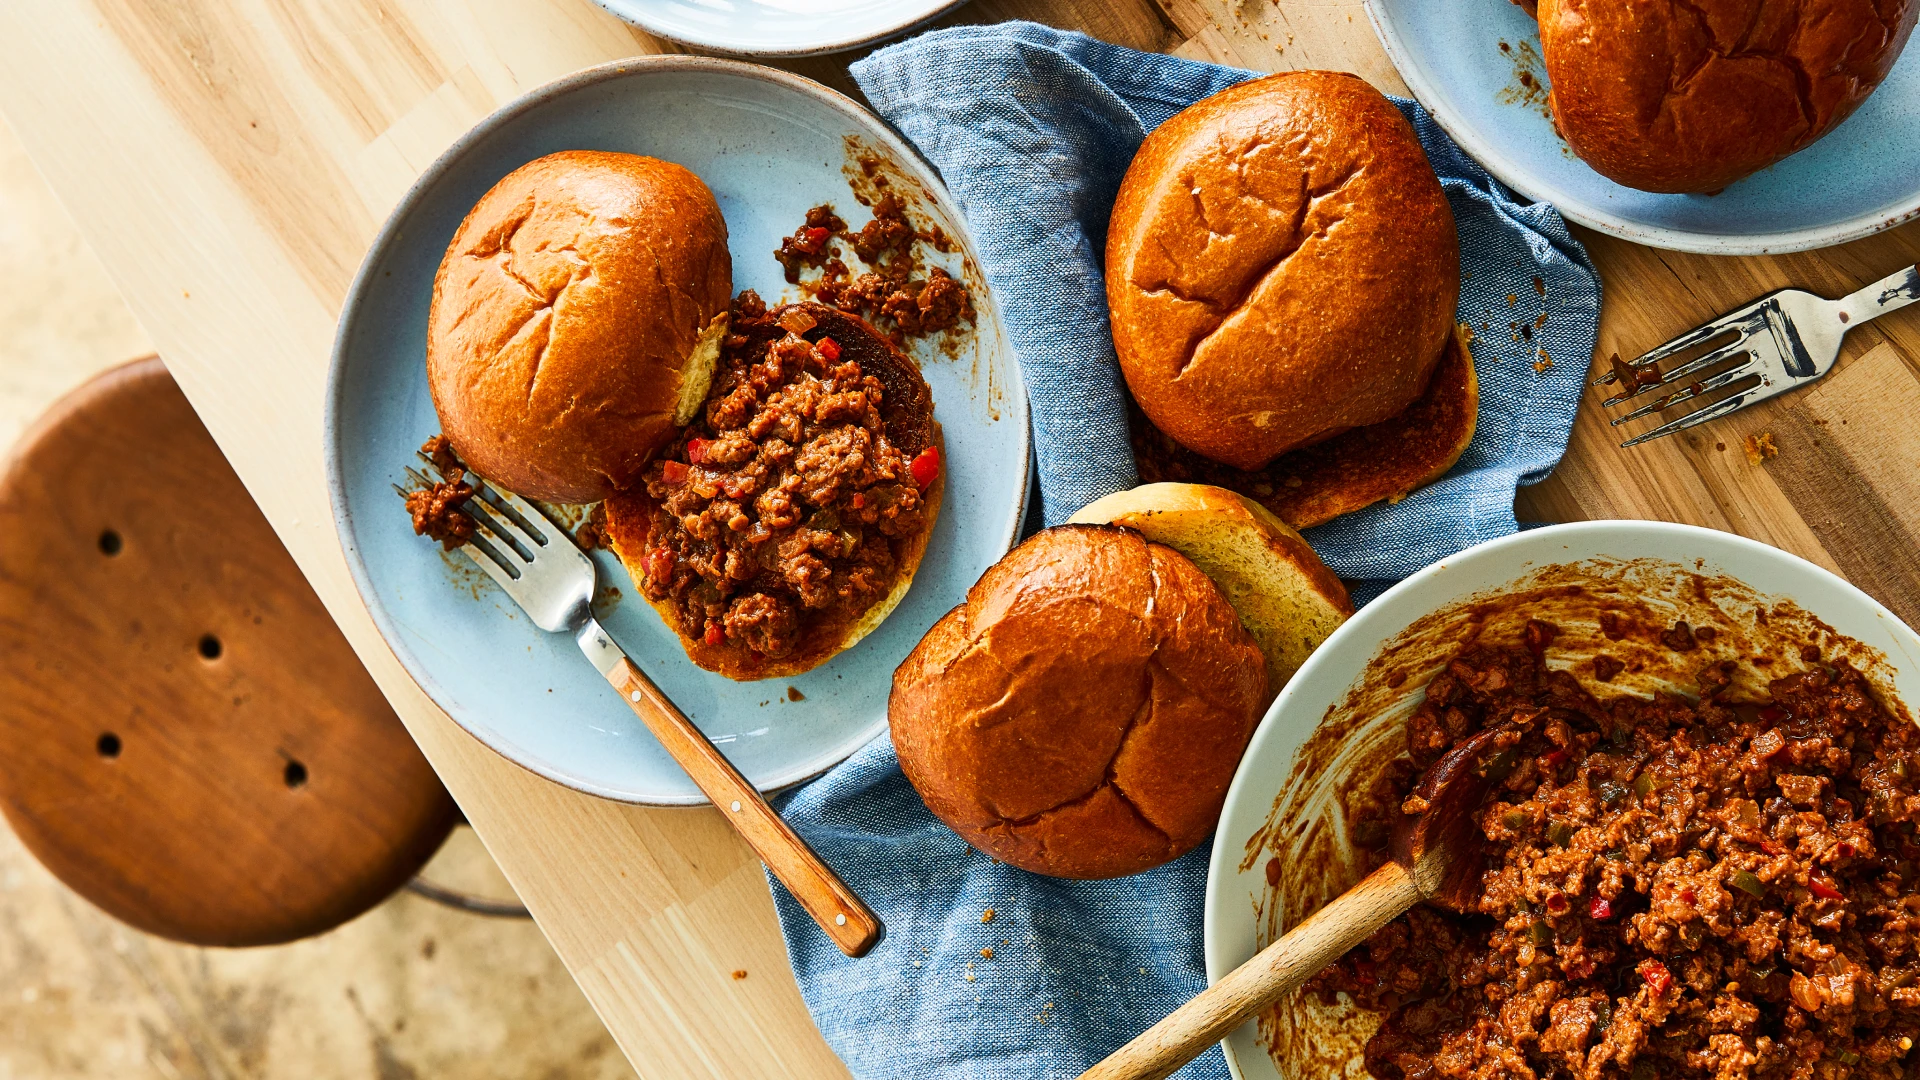  Impossible™ Sloppy Joes recipe by Tanya Holland with buns on plates and in a bowl on a table with forks